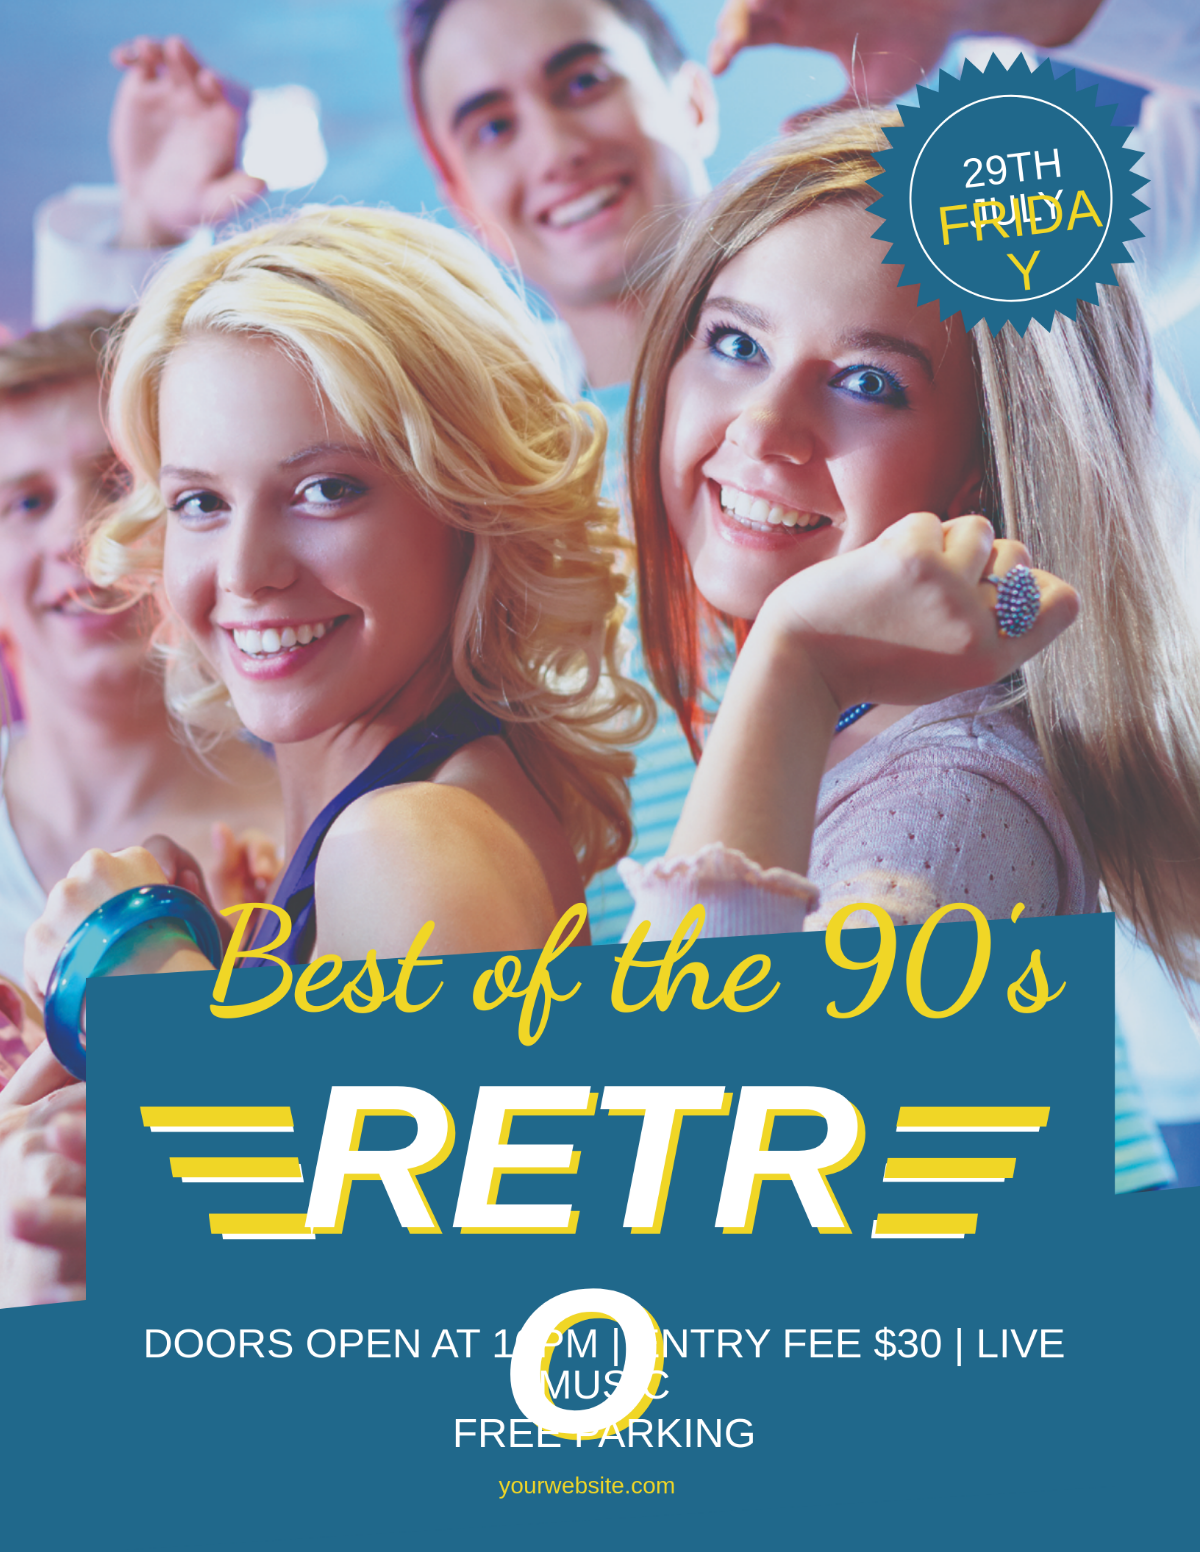 Cool Retro Style Flyer Template